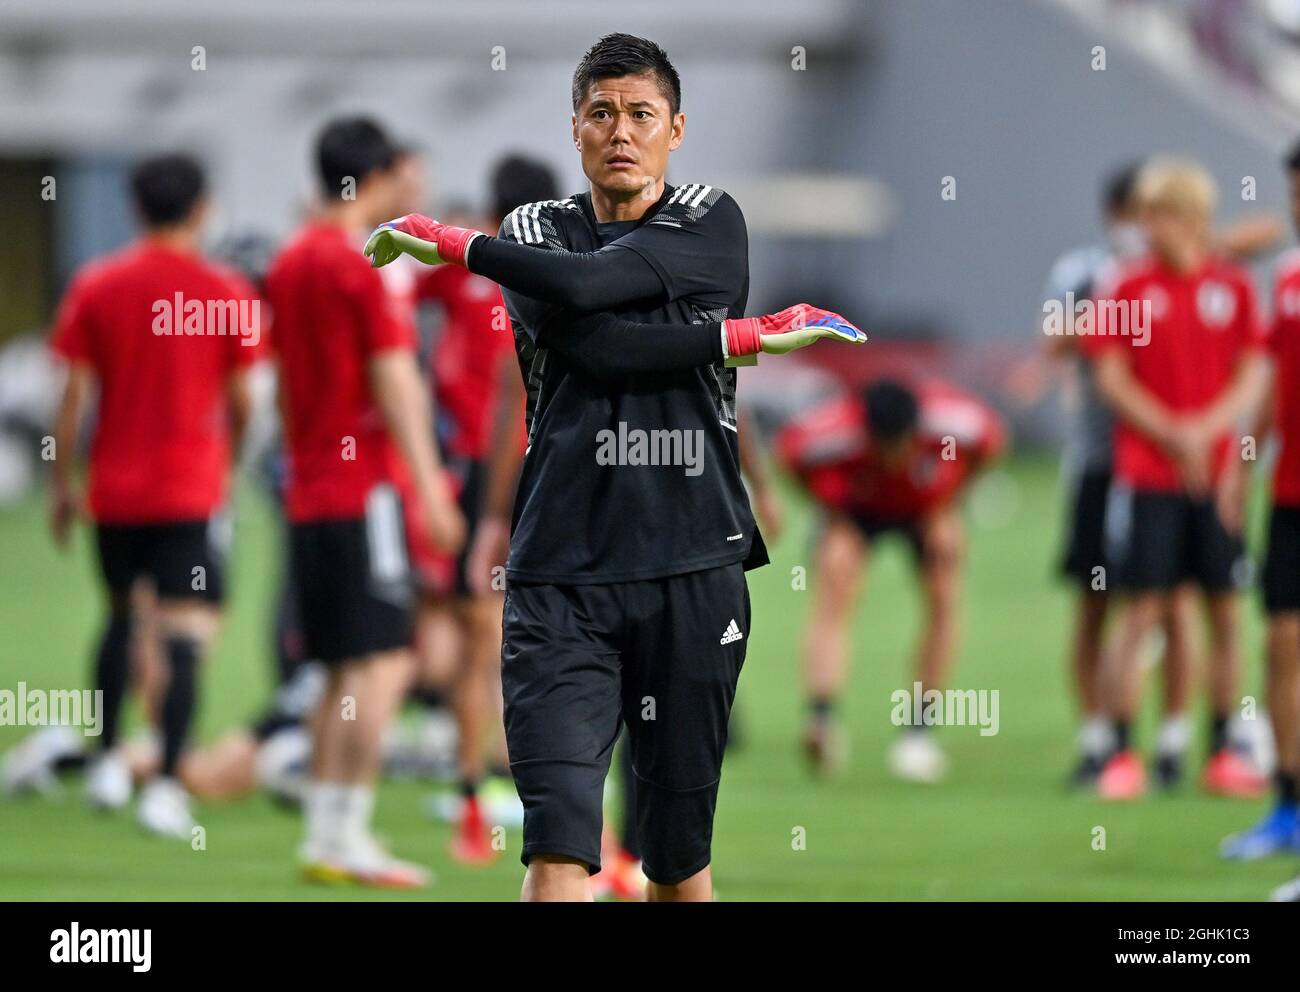 Doha, Qatar. 6th Sep, 2021. Kawashima Eiji of Japan attends a training session before the Group B match against China of FIFA World Cup Qatar 2022 Qulifier in Doha, Qatar, Sept. 6, 2021. Credit: Nikku/Xinhua/Alamy Live News Stock Photo